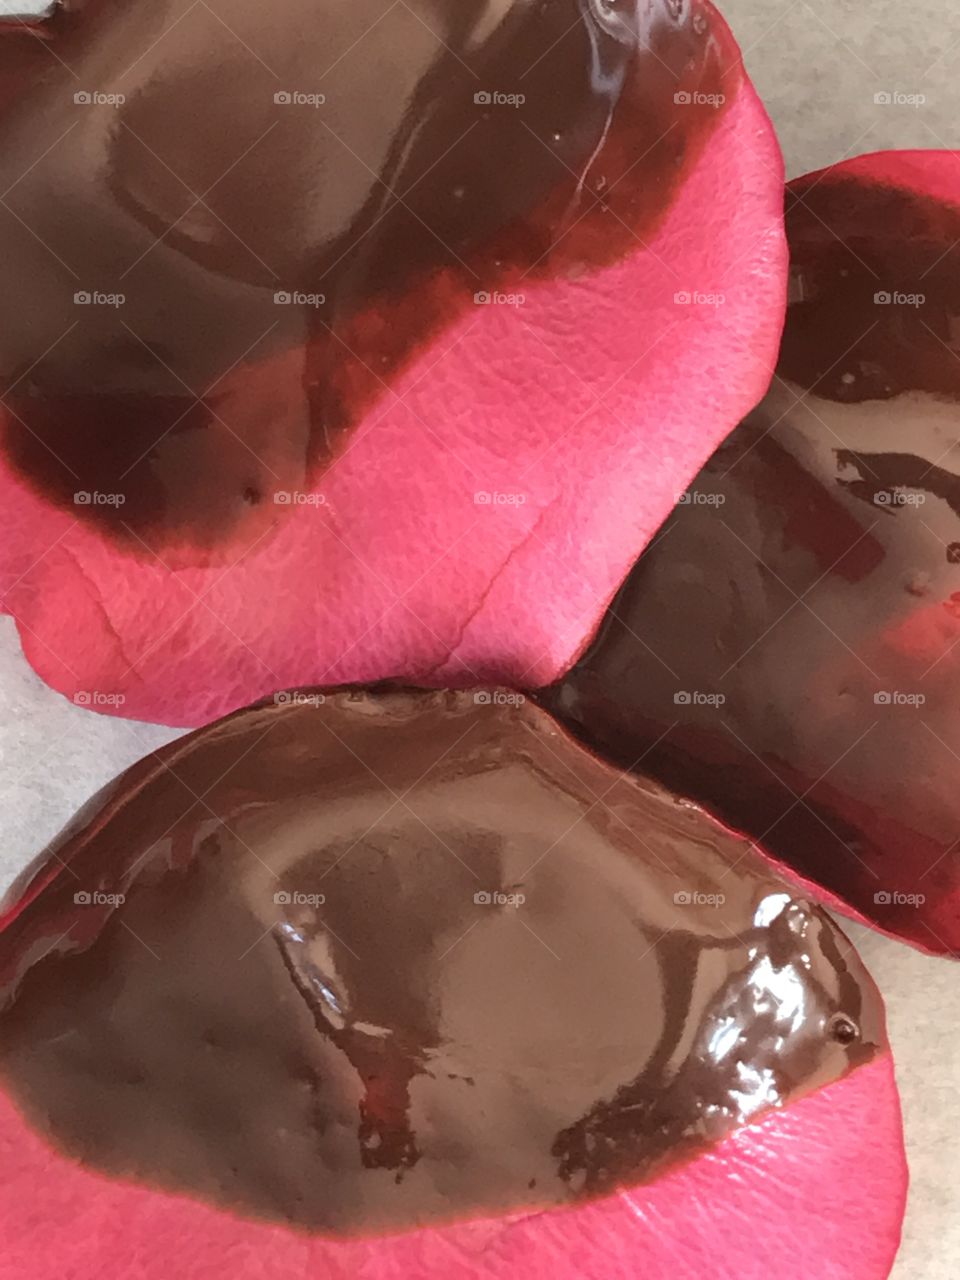 Chocolate covered rose petals 